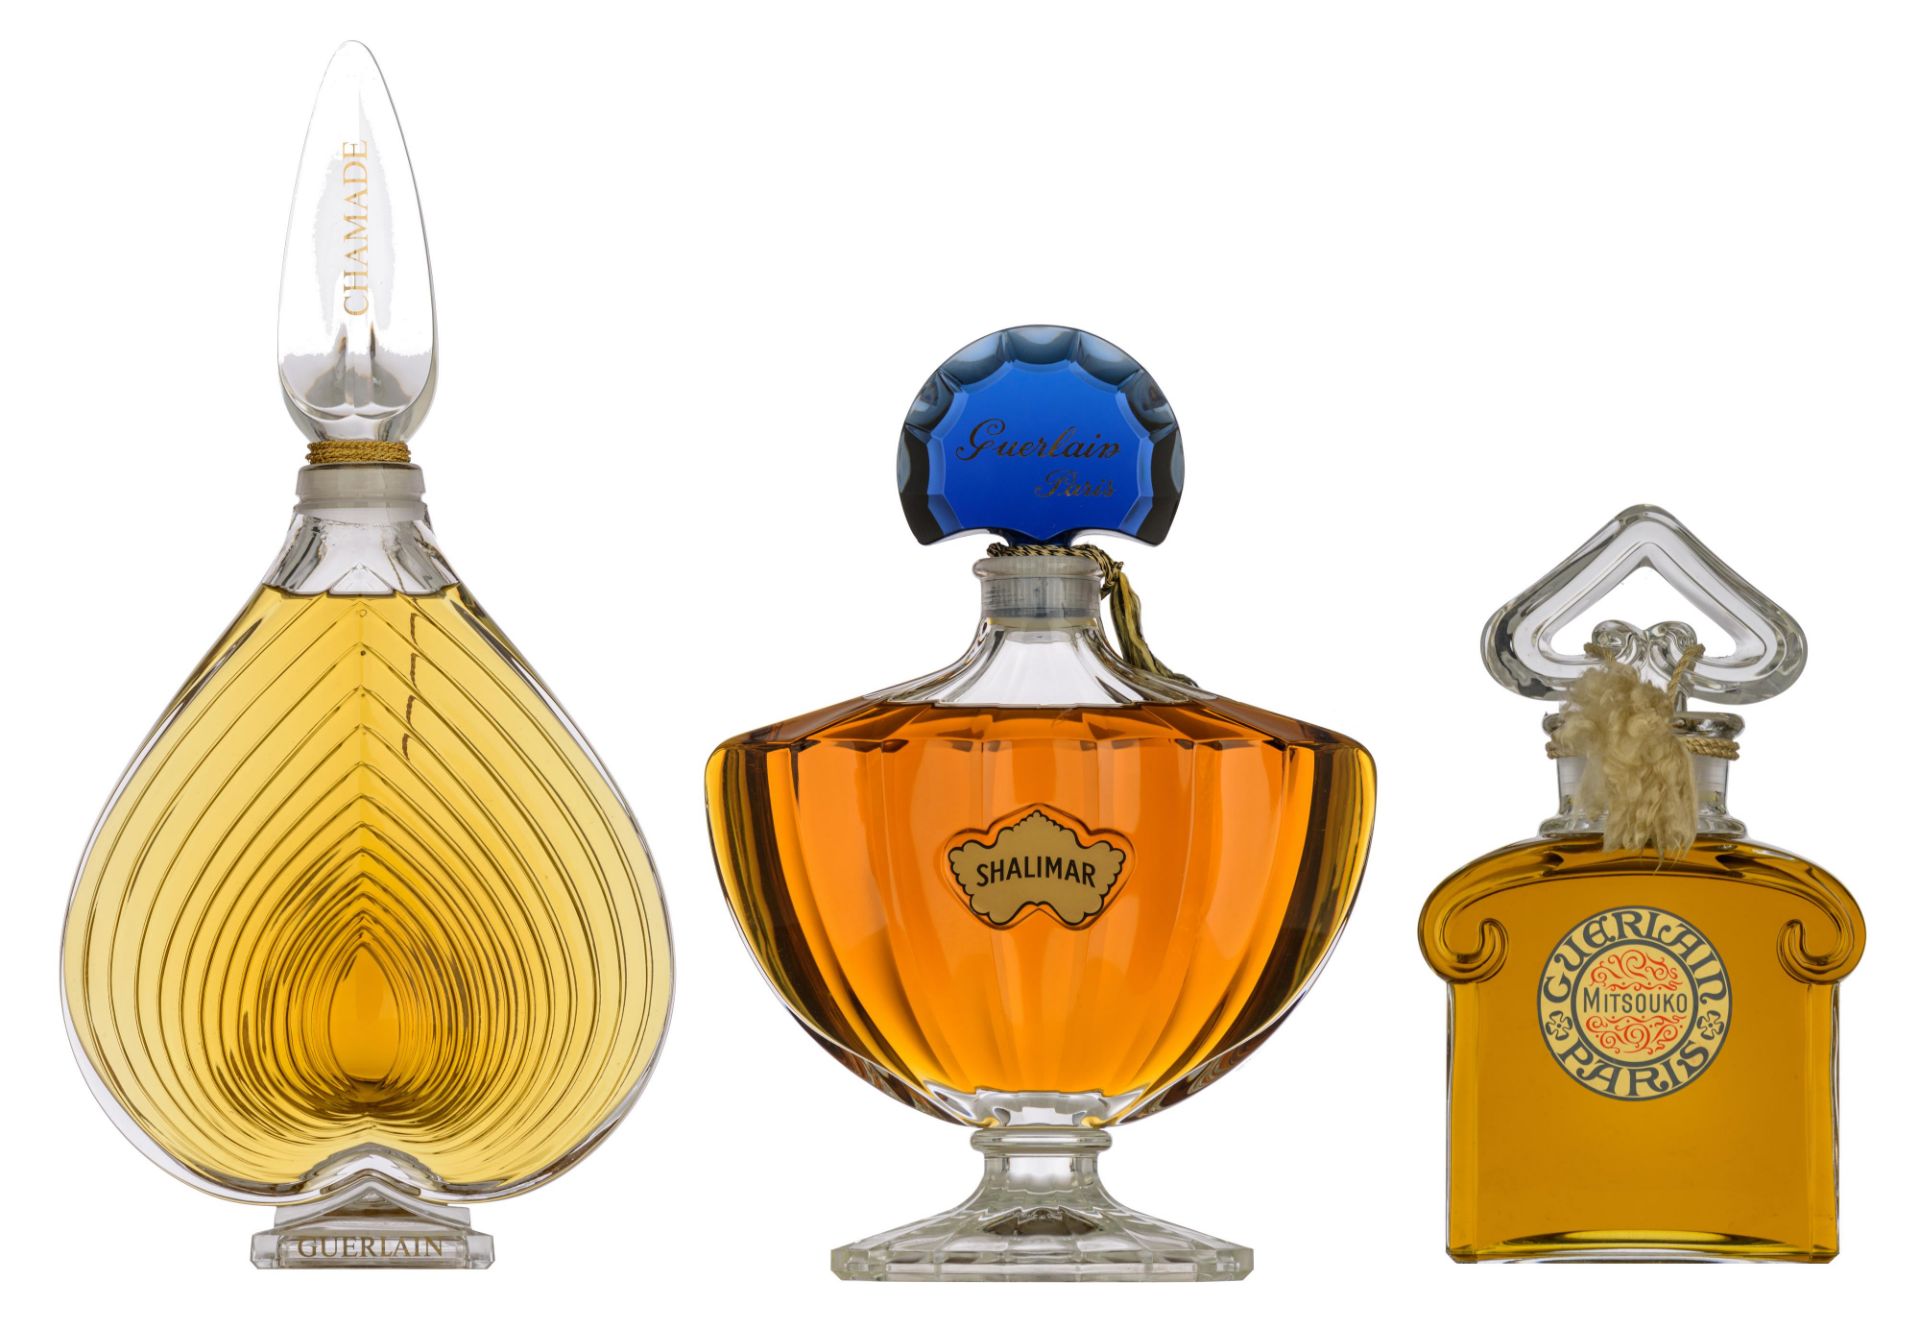 Three large perfume factice display bottles: Chamade, Shalimar and Misouko by Guerlain, H 30 - 38 -